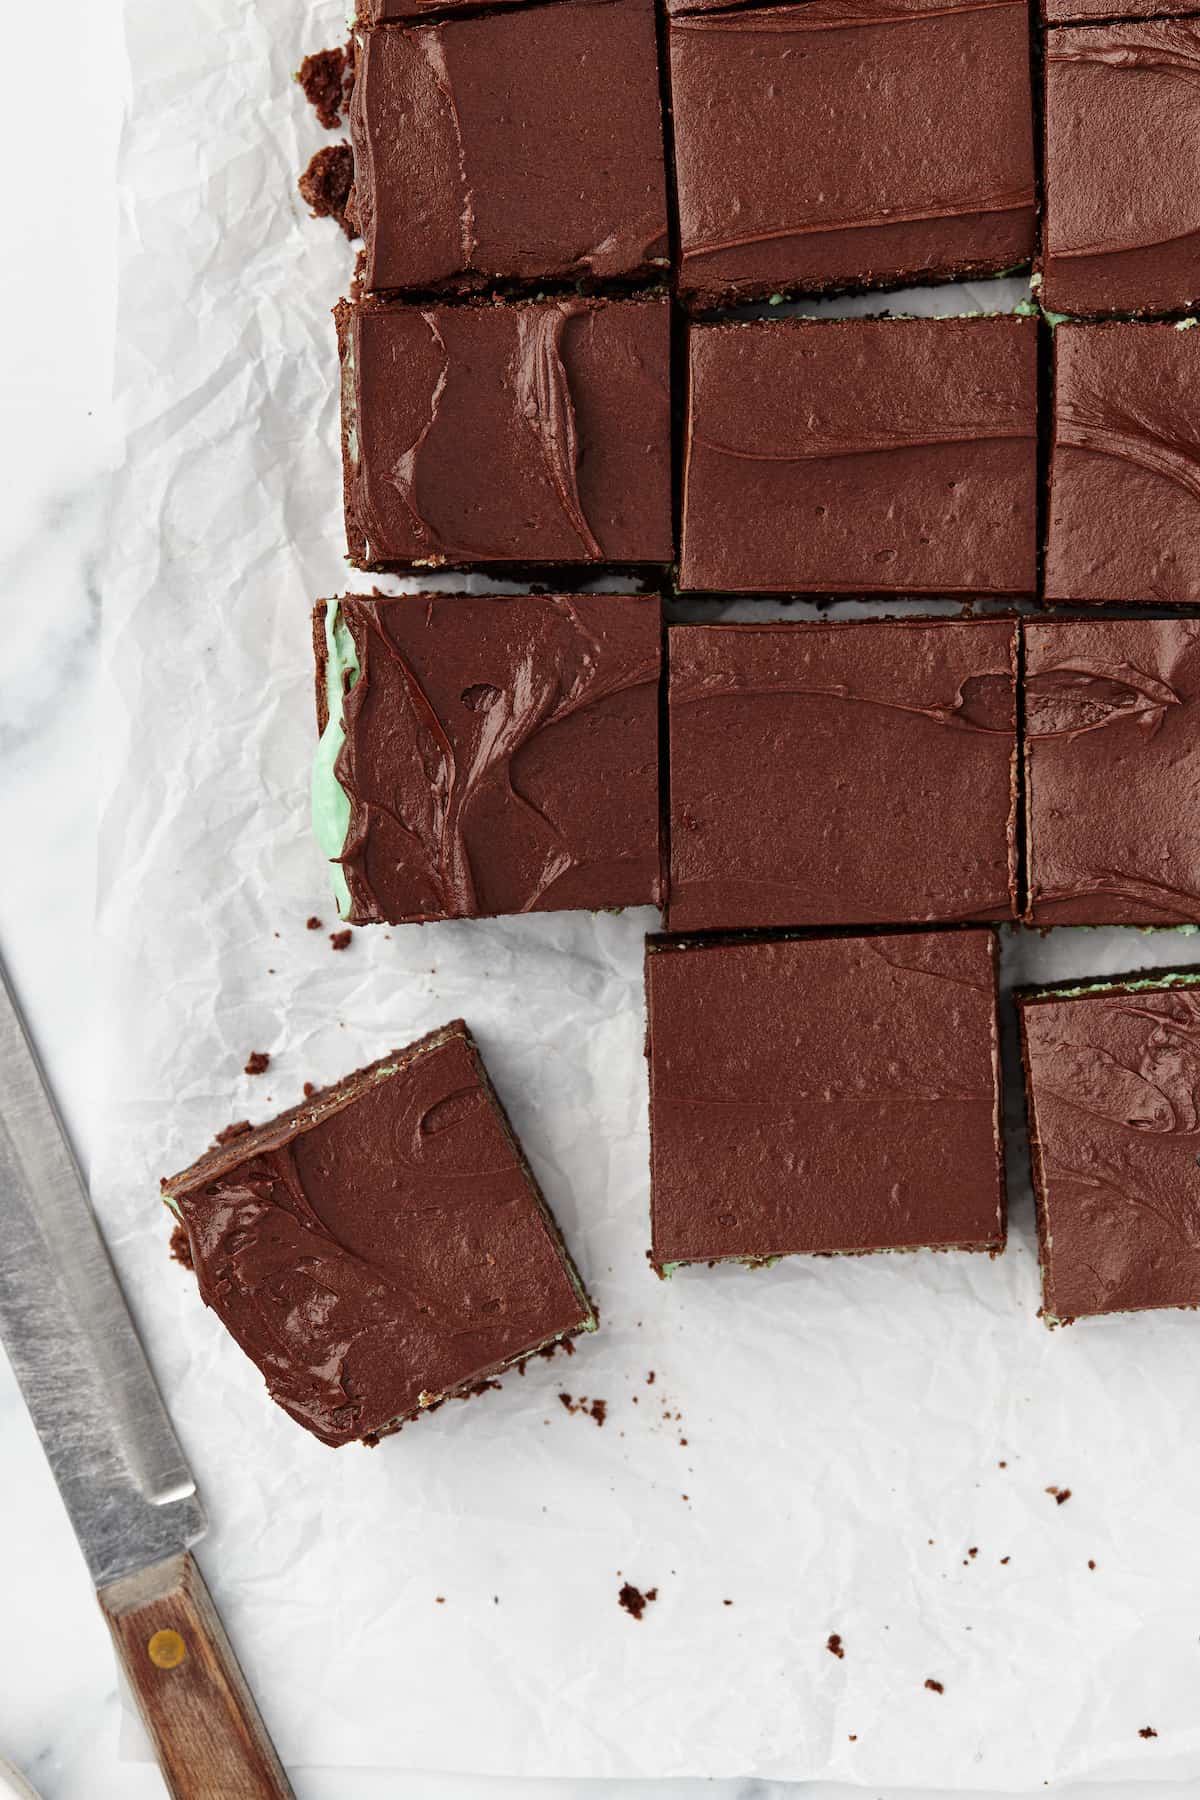 Twelve mint brownies on a piece of parchment paper next to a sharp kitchen knife